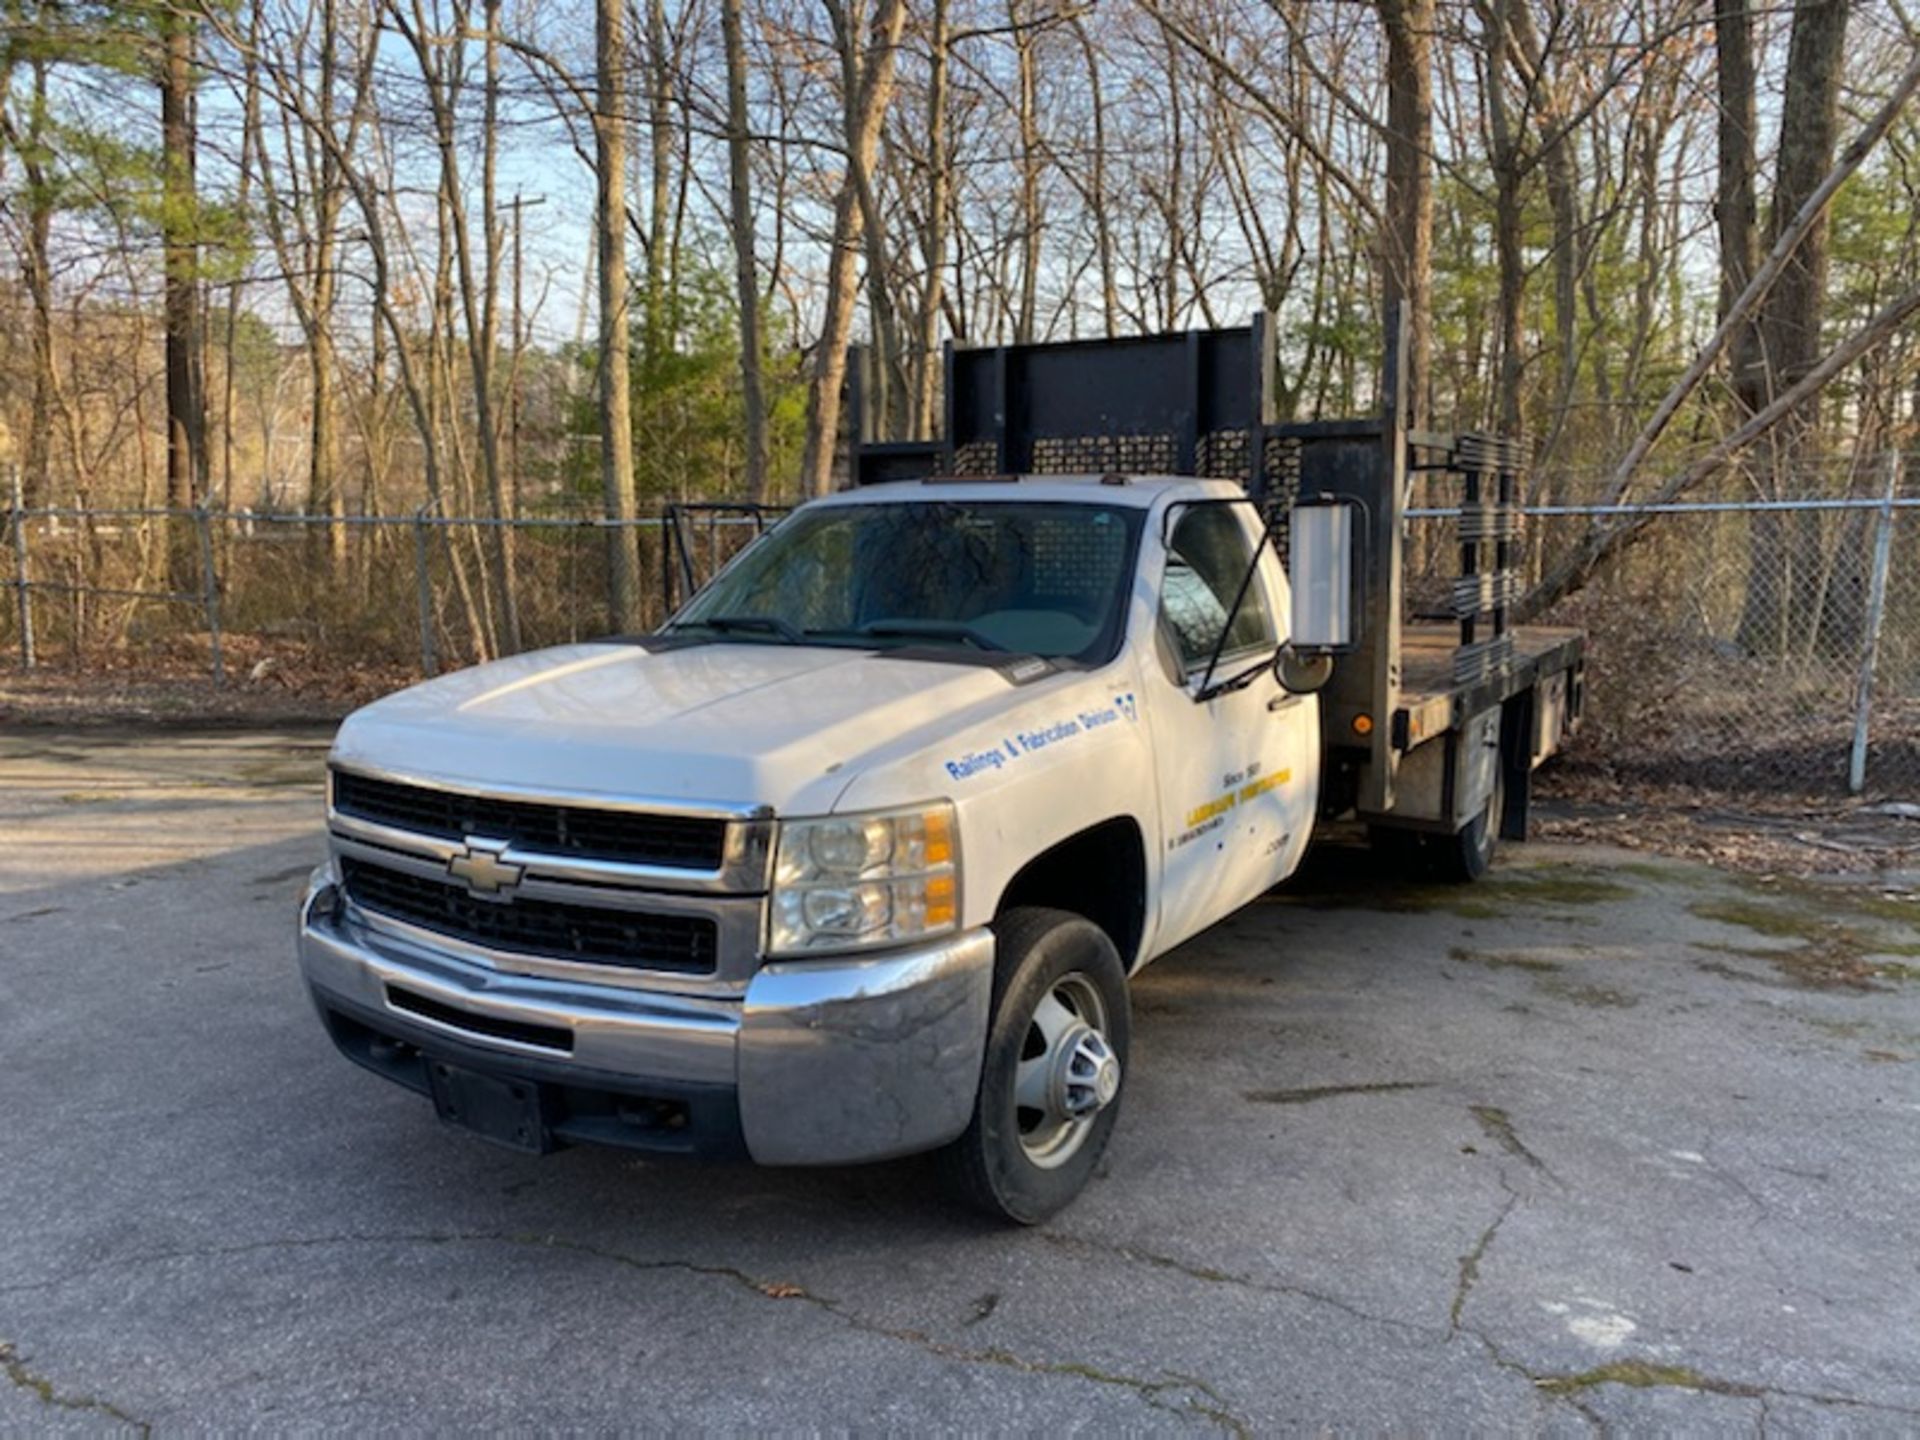 2008 Chevy #3500 HD 6-Wheel Diesel 14' Wood Deck Flatbed Stake Body w/Liftgate, Automatic SEE DESC - Image 2 of 2